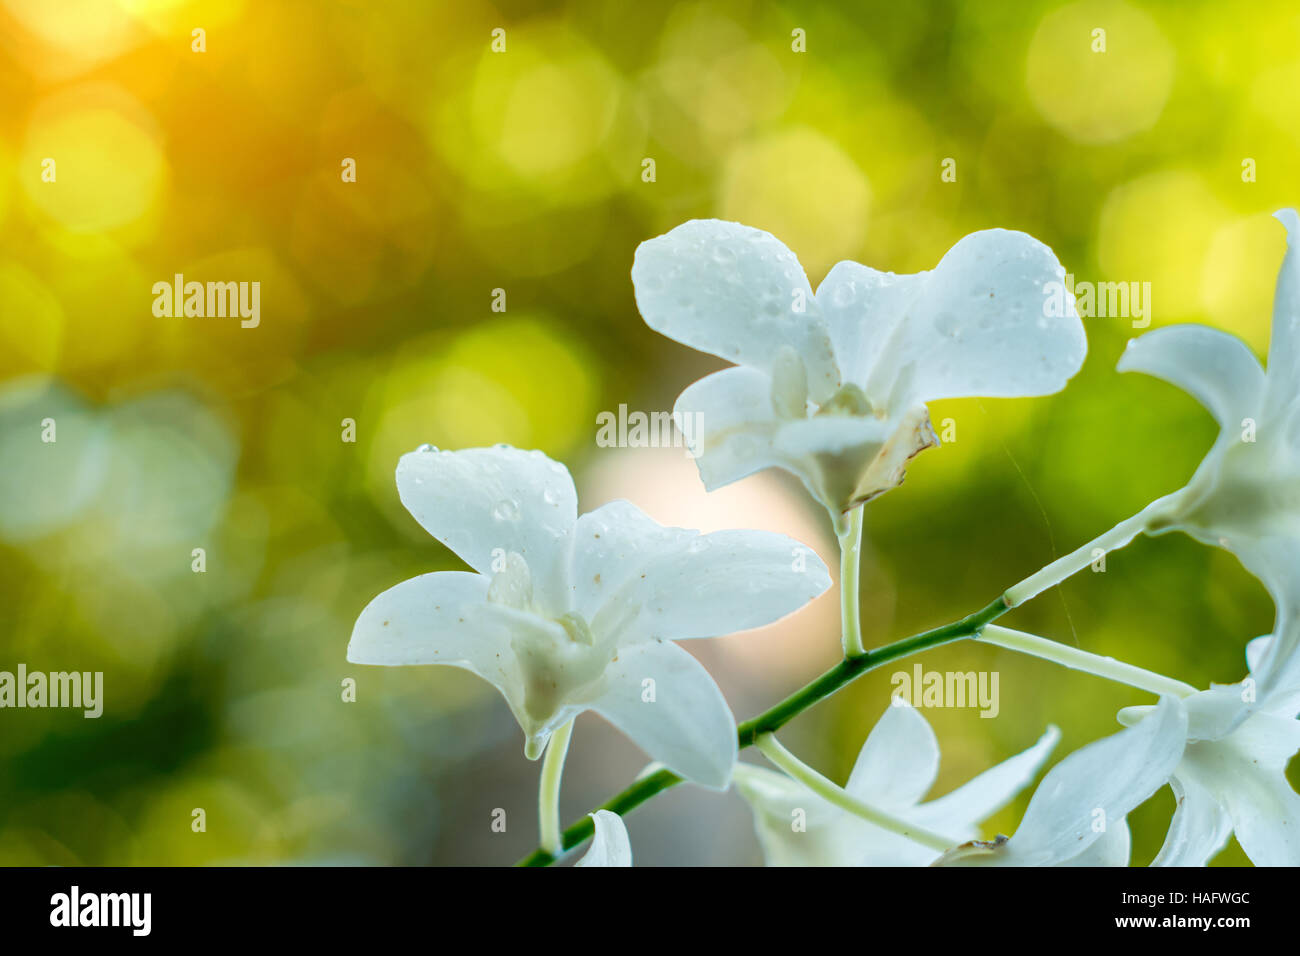 Beautiful White Phalaenopsis orchid on a branch from Thailand Stock Photo